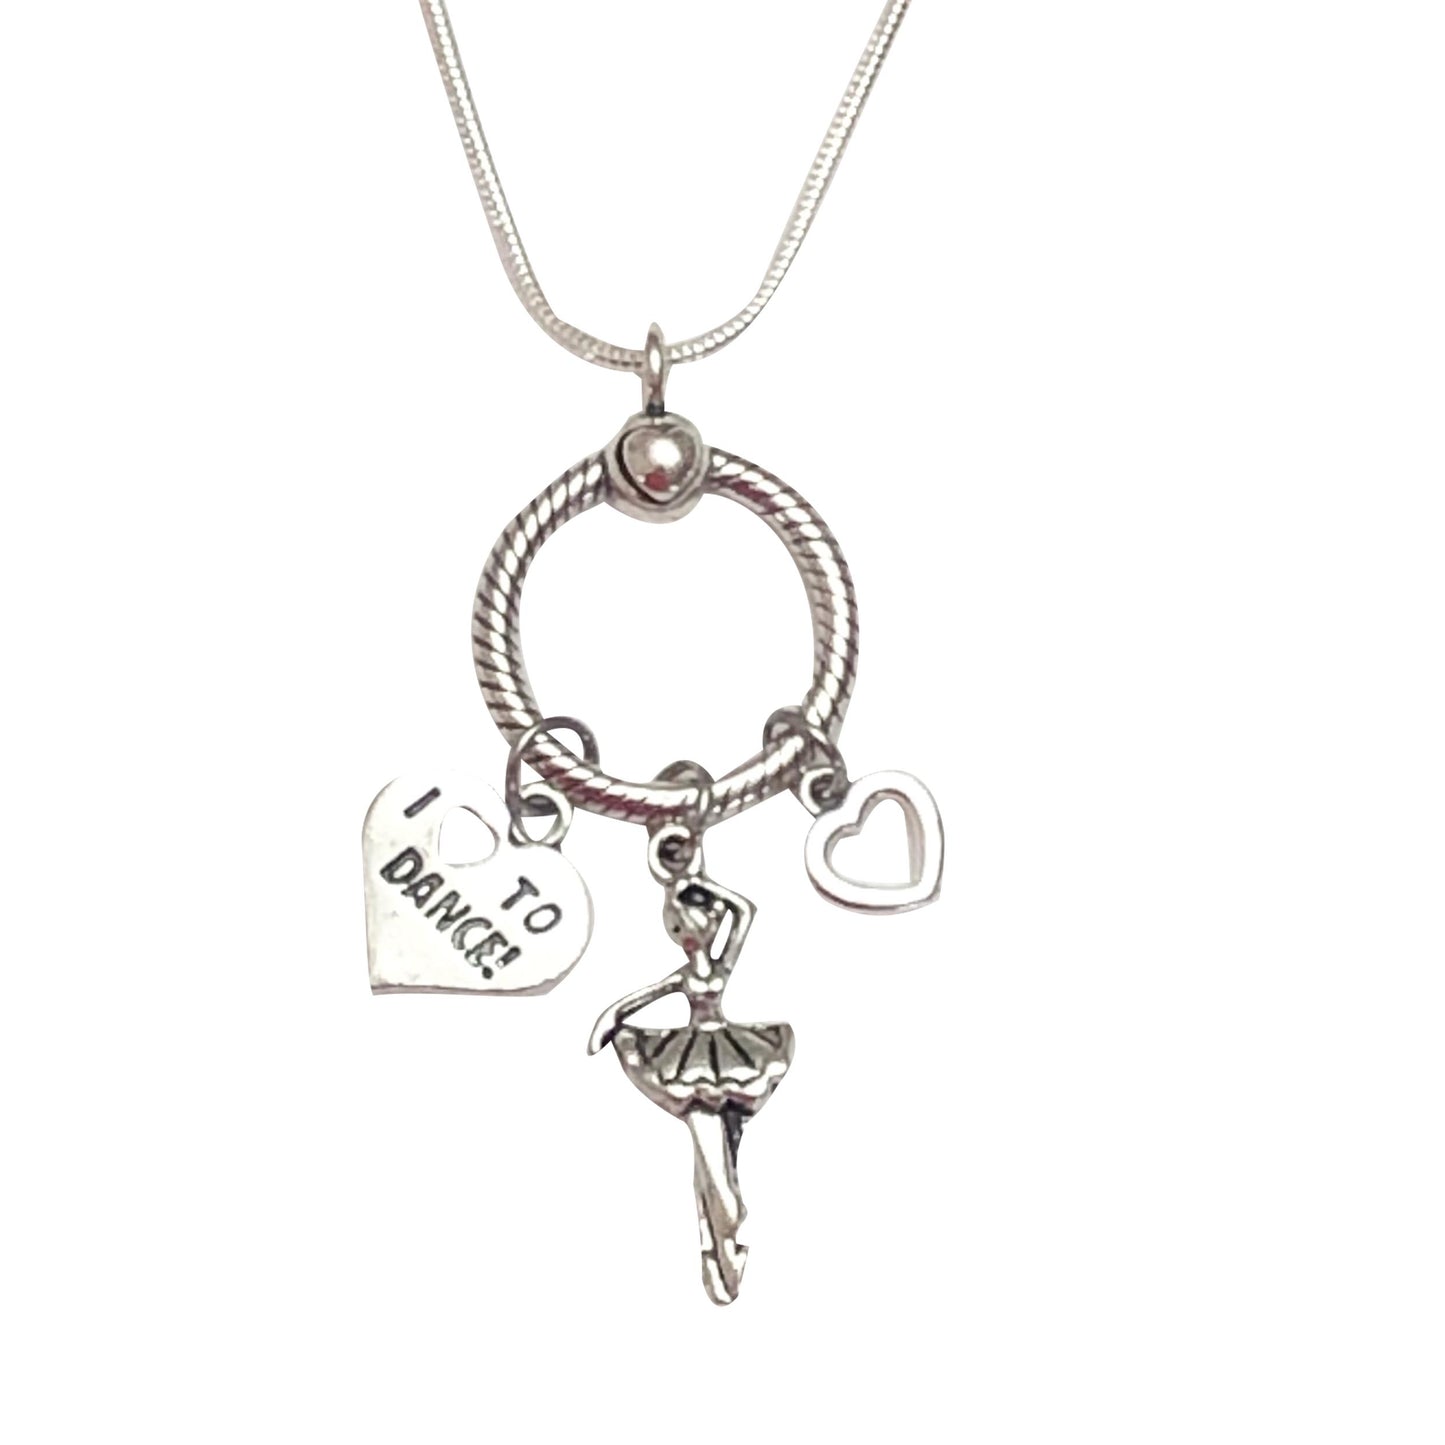 Dance Sterling Silver Necklace with Charm Holder - Cheer and Dance On Demand